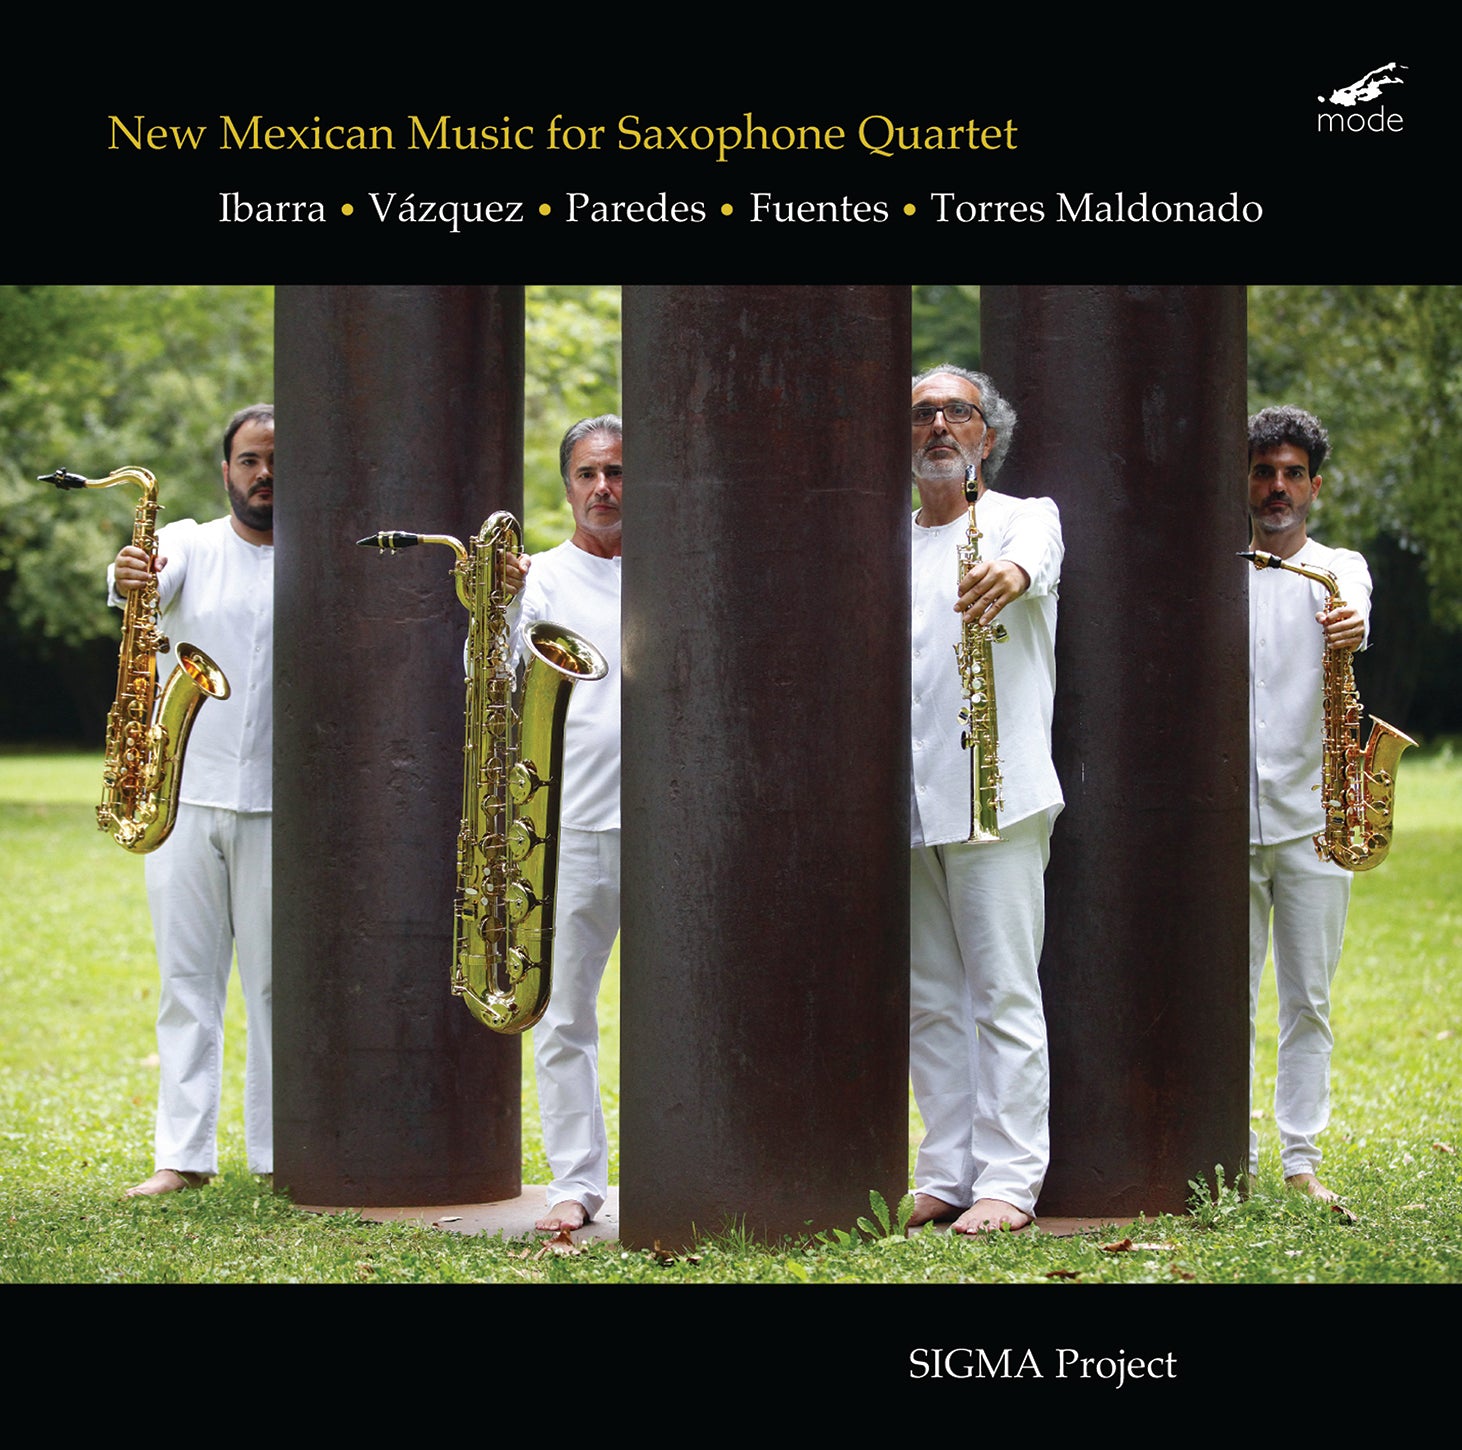 New Mexican Music for Saxophone Quartet / SIGMA Project